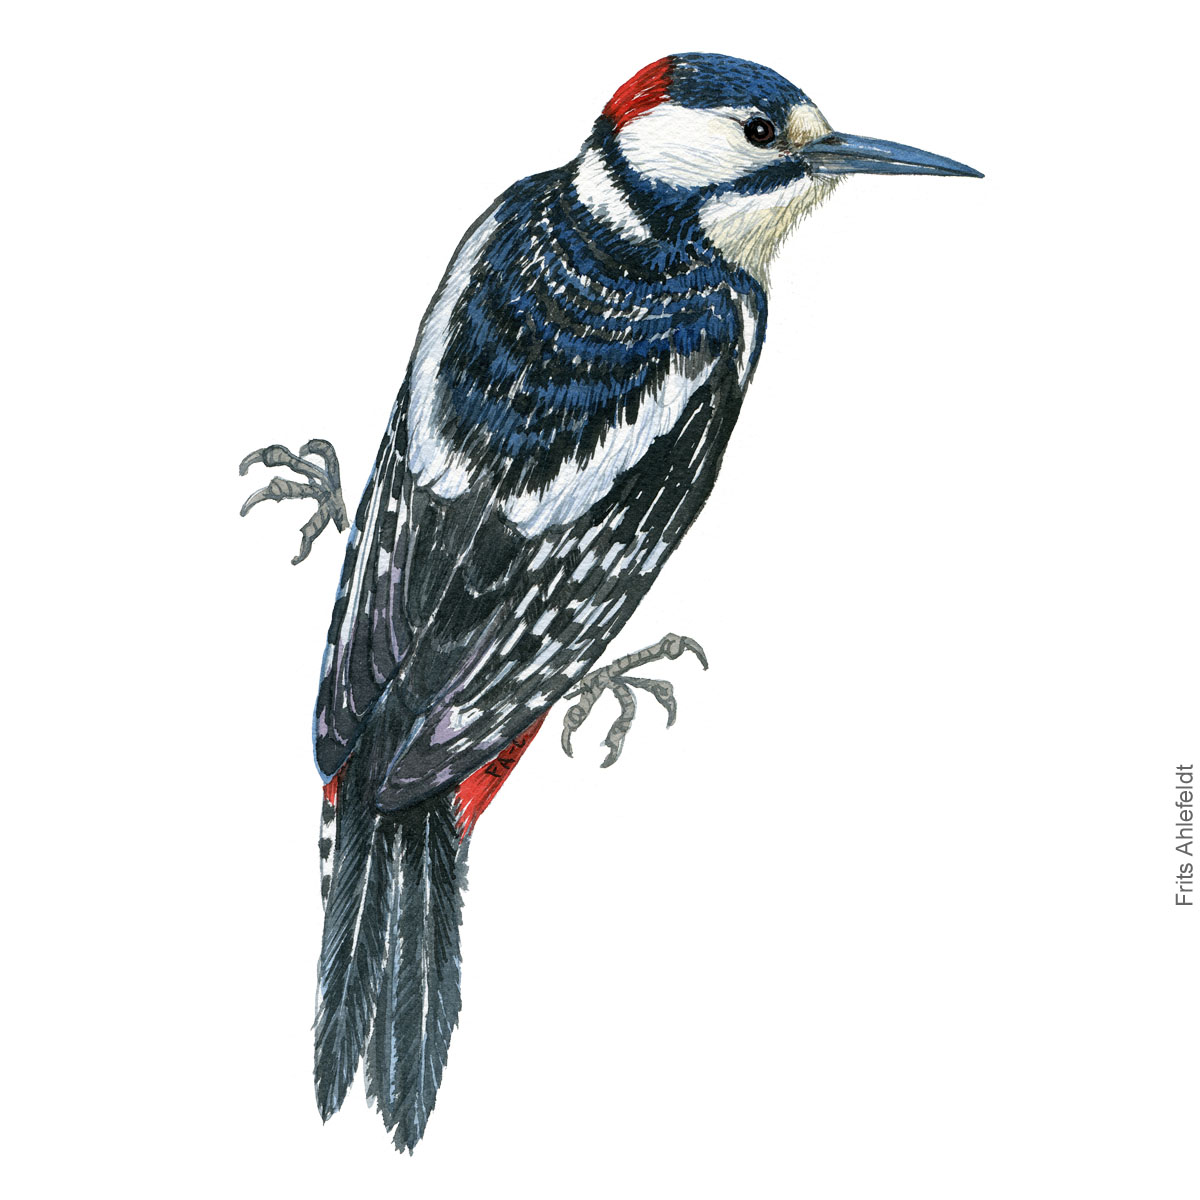 Stor flagspaette - Great spotted woodpecker watercolor illustration. Painting by Frits Ahlefeldt - Fugle akvarel tegning